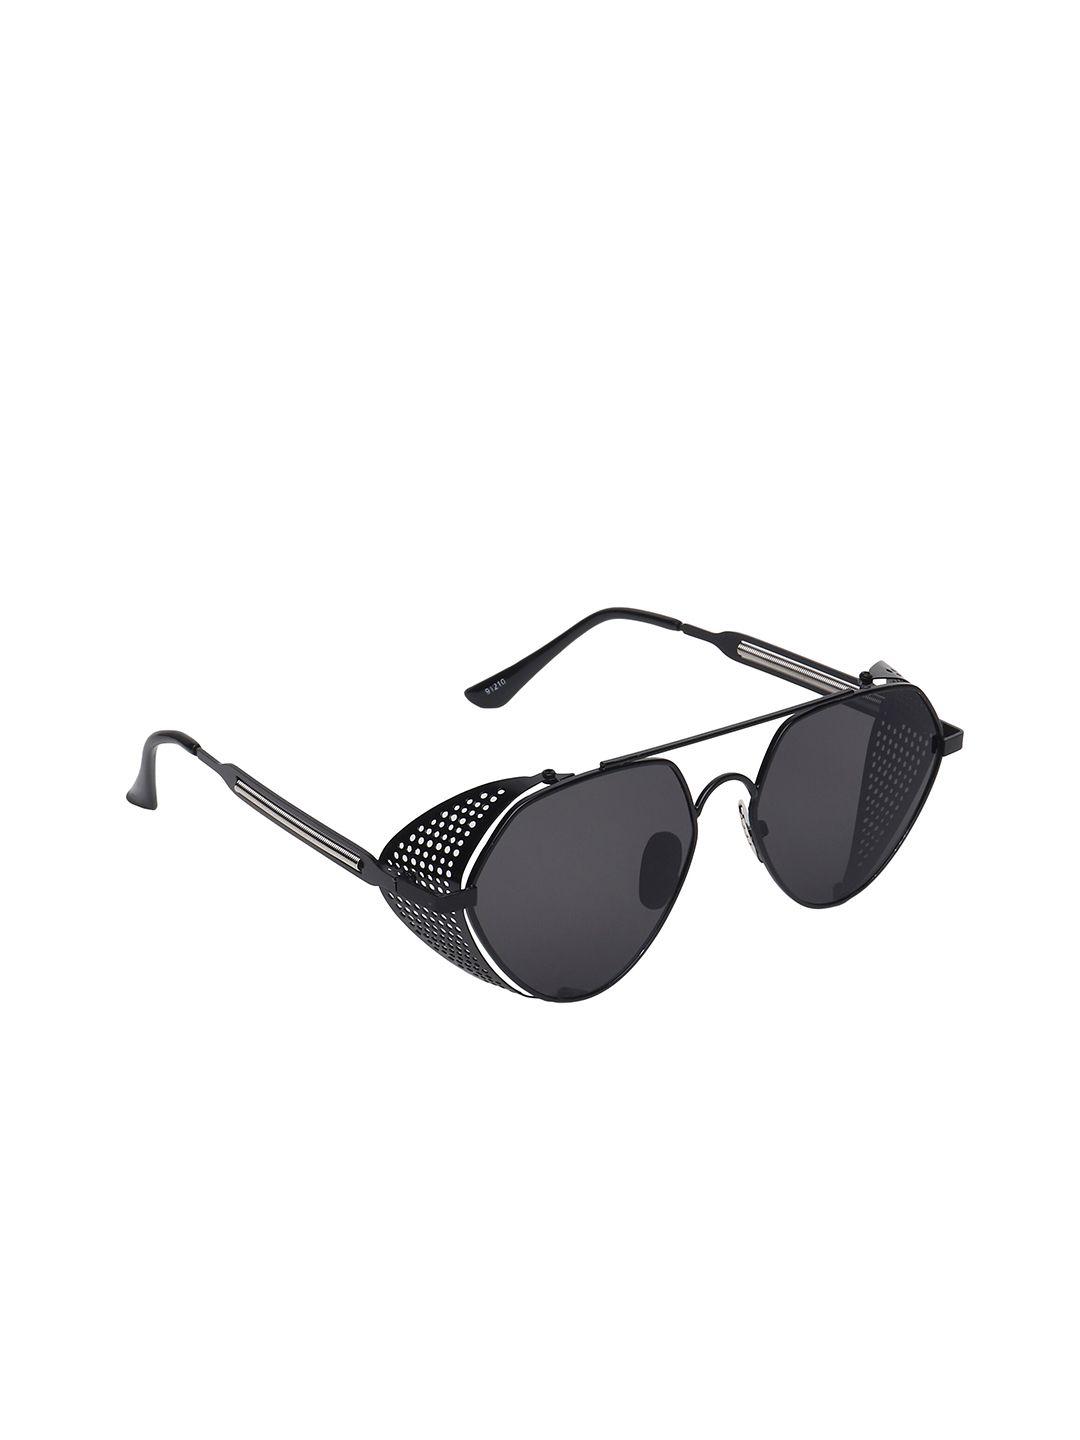 swiss design oval sunglasses with uv protected lens sdsg-91210-01